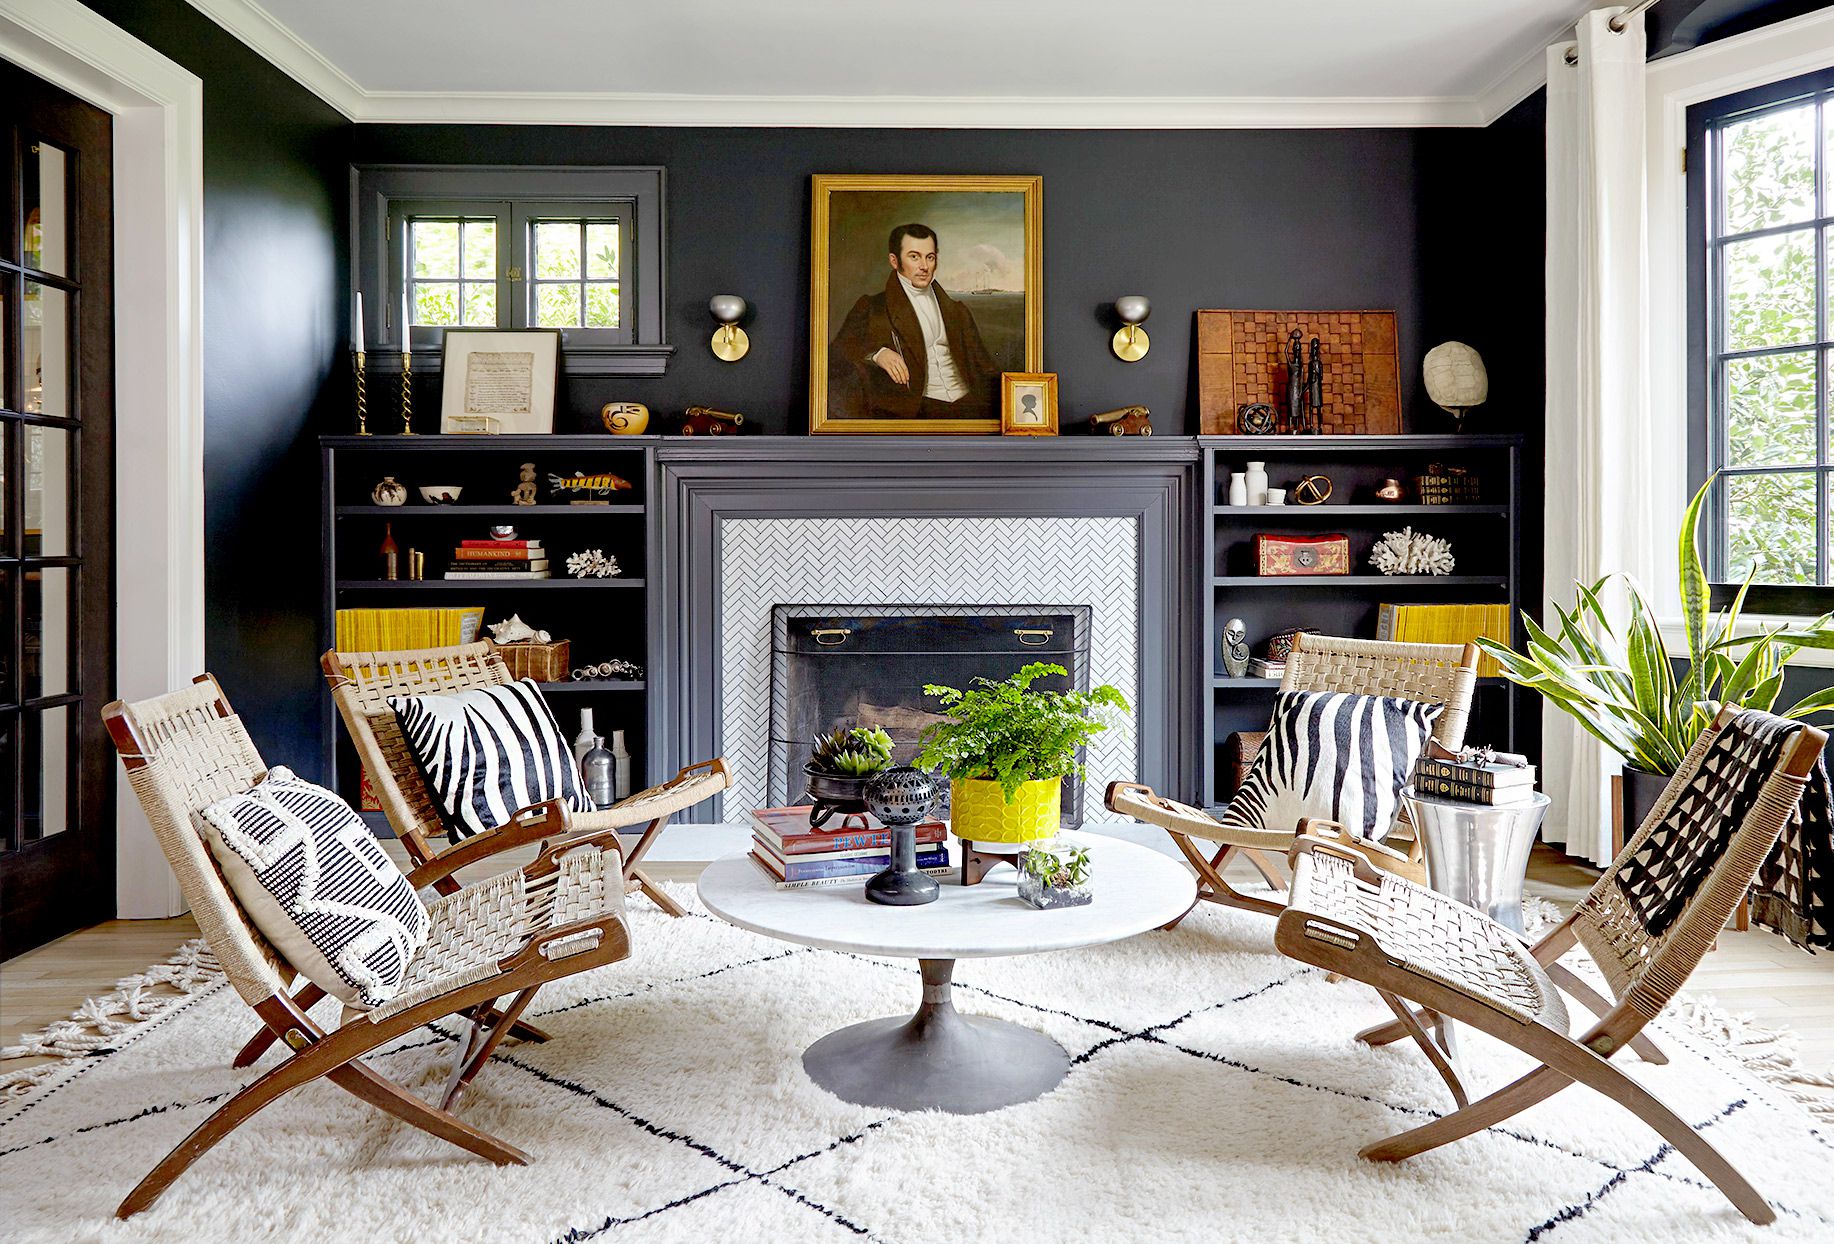 Transform Your Living Room with Fireplace: Inspiring Home Decorating Ideas